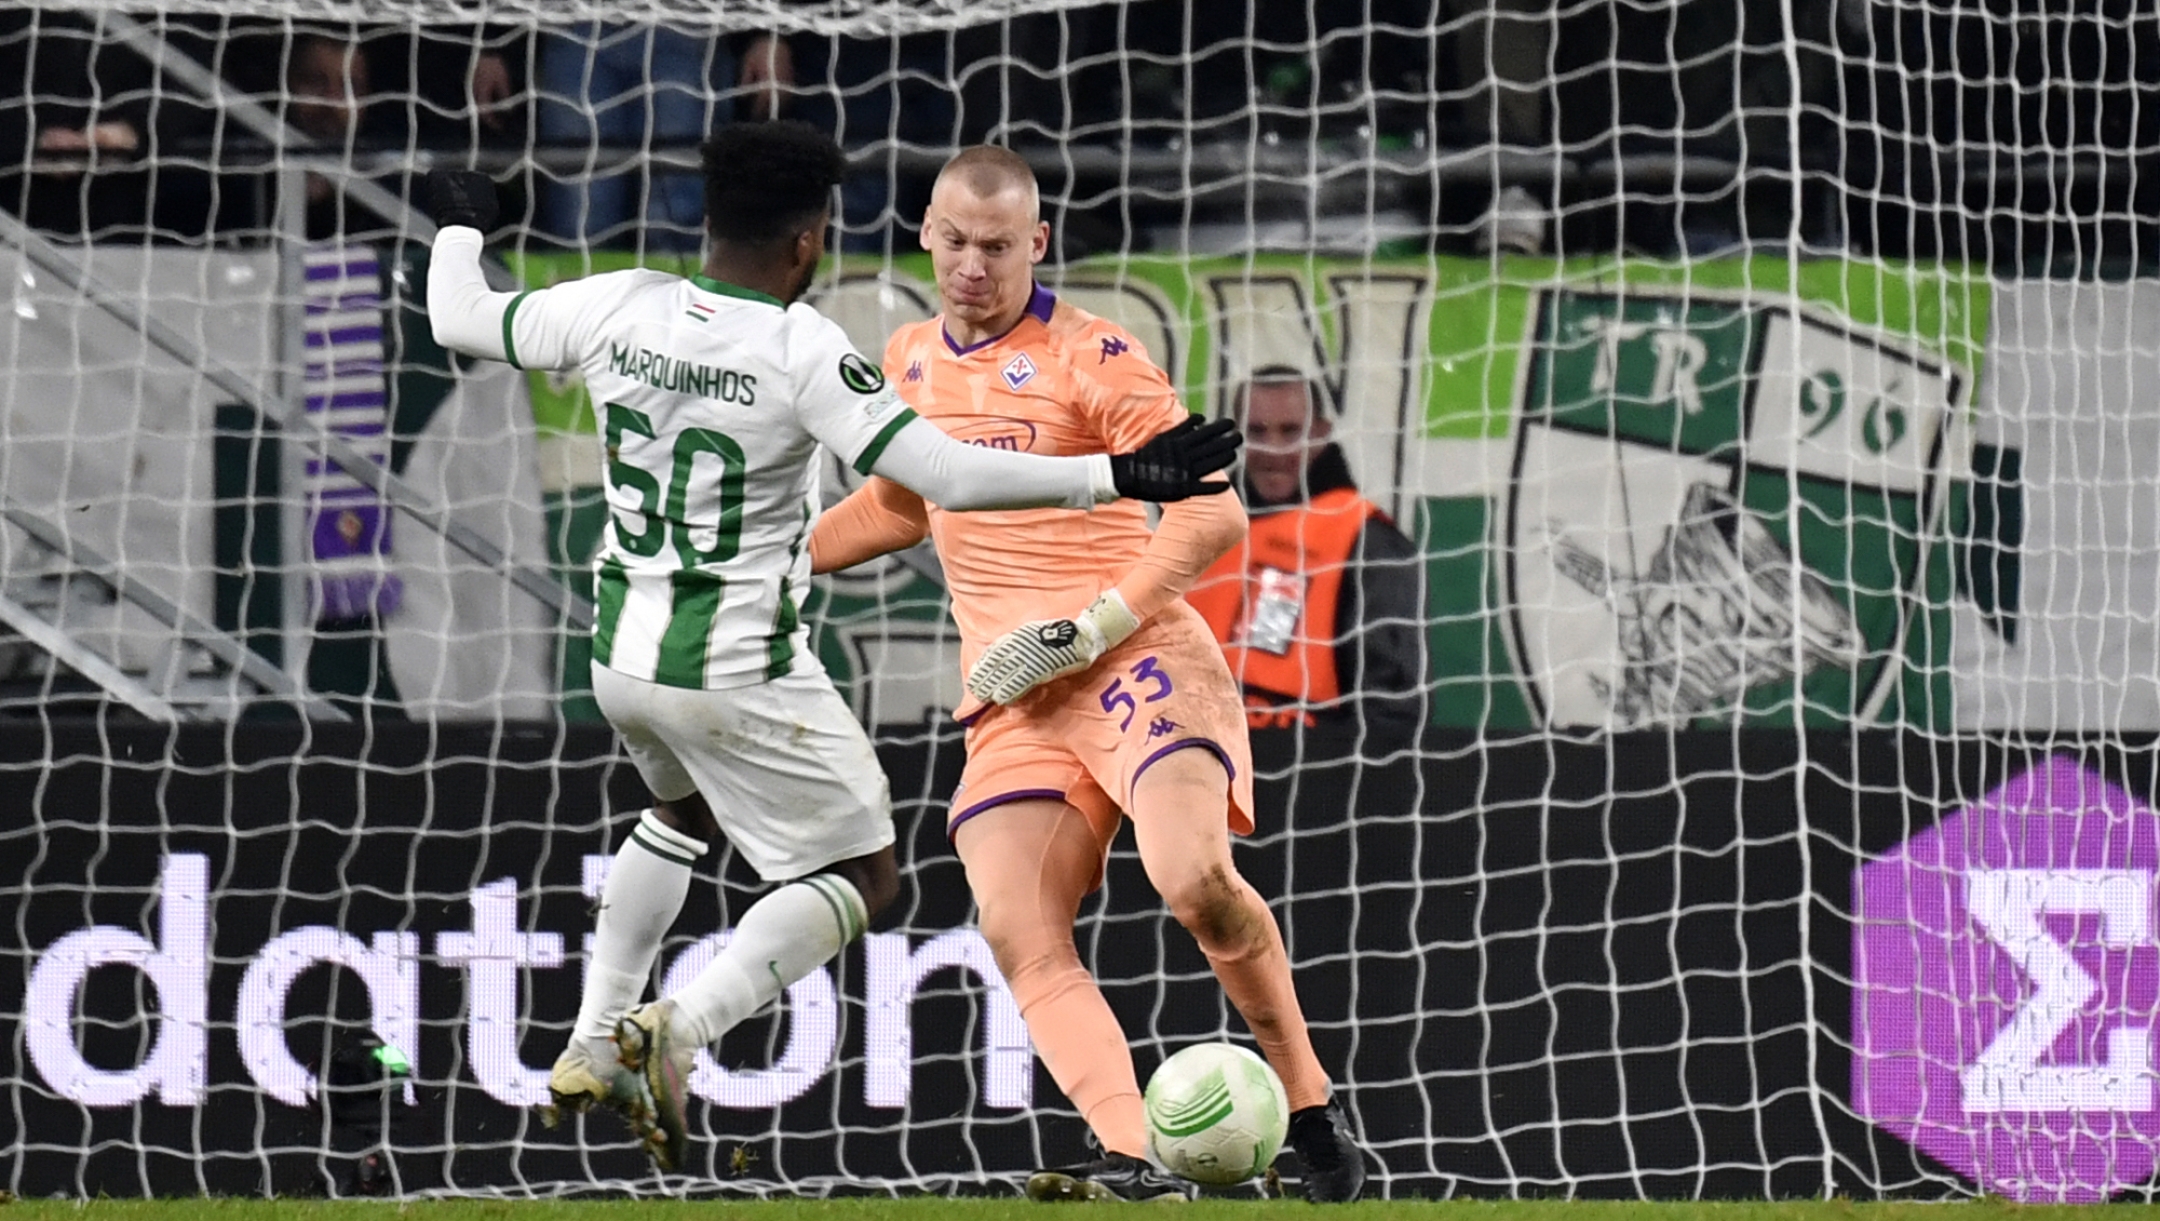 Fiorentina goalkeeper Oliver Christensen makes a save in front of Ferencvaros' Marquinhos during the Europa Conference League group F soccer match between Ferencvaros and Fiorentina at the Ferencvaros Stadion in Budapest, Thursday, Dec. 14, 2023. (AP Photo/Denes Erdos)